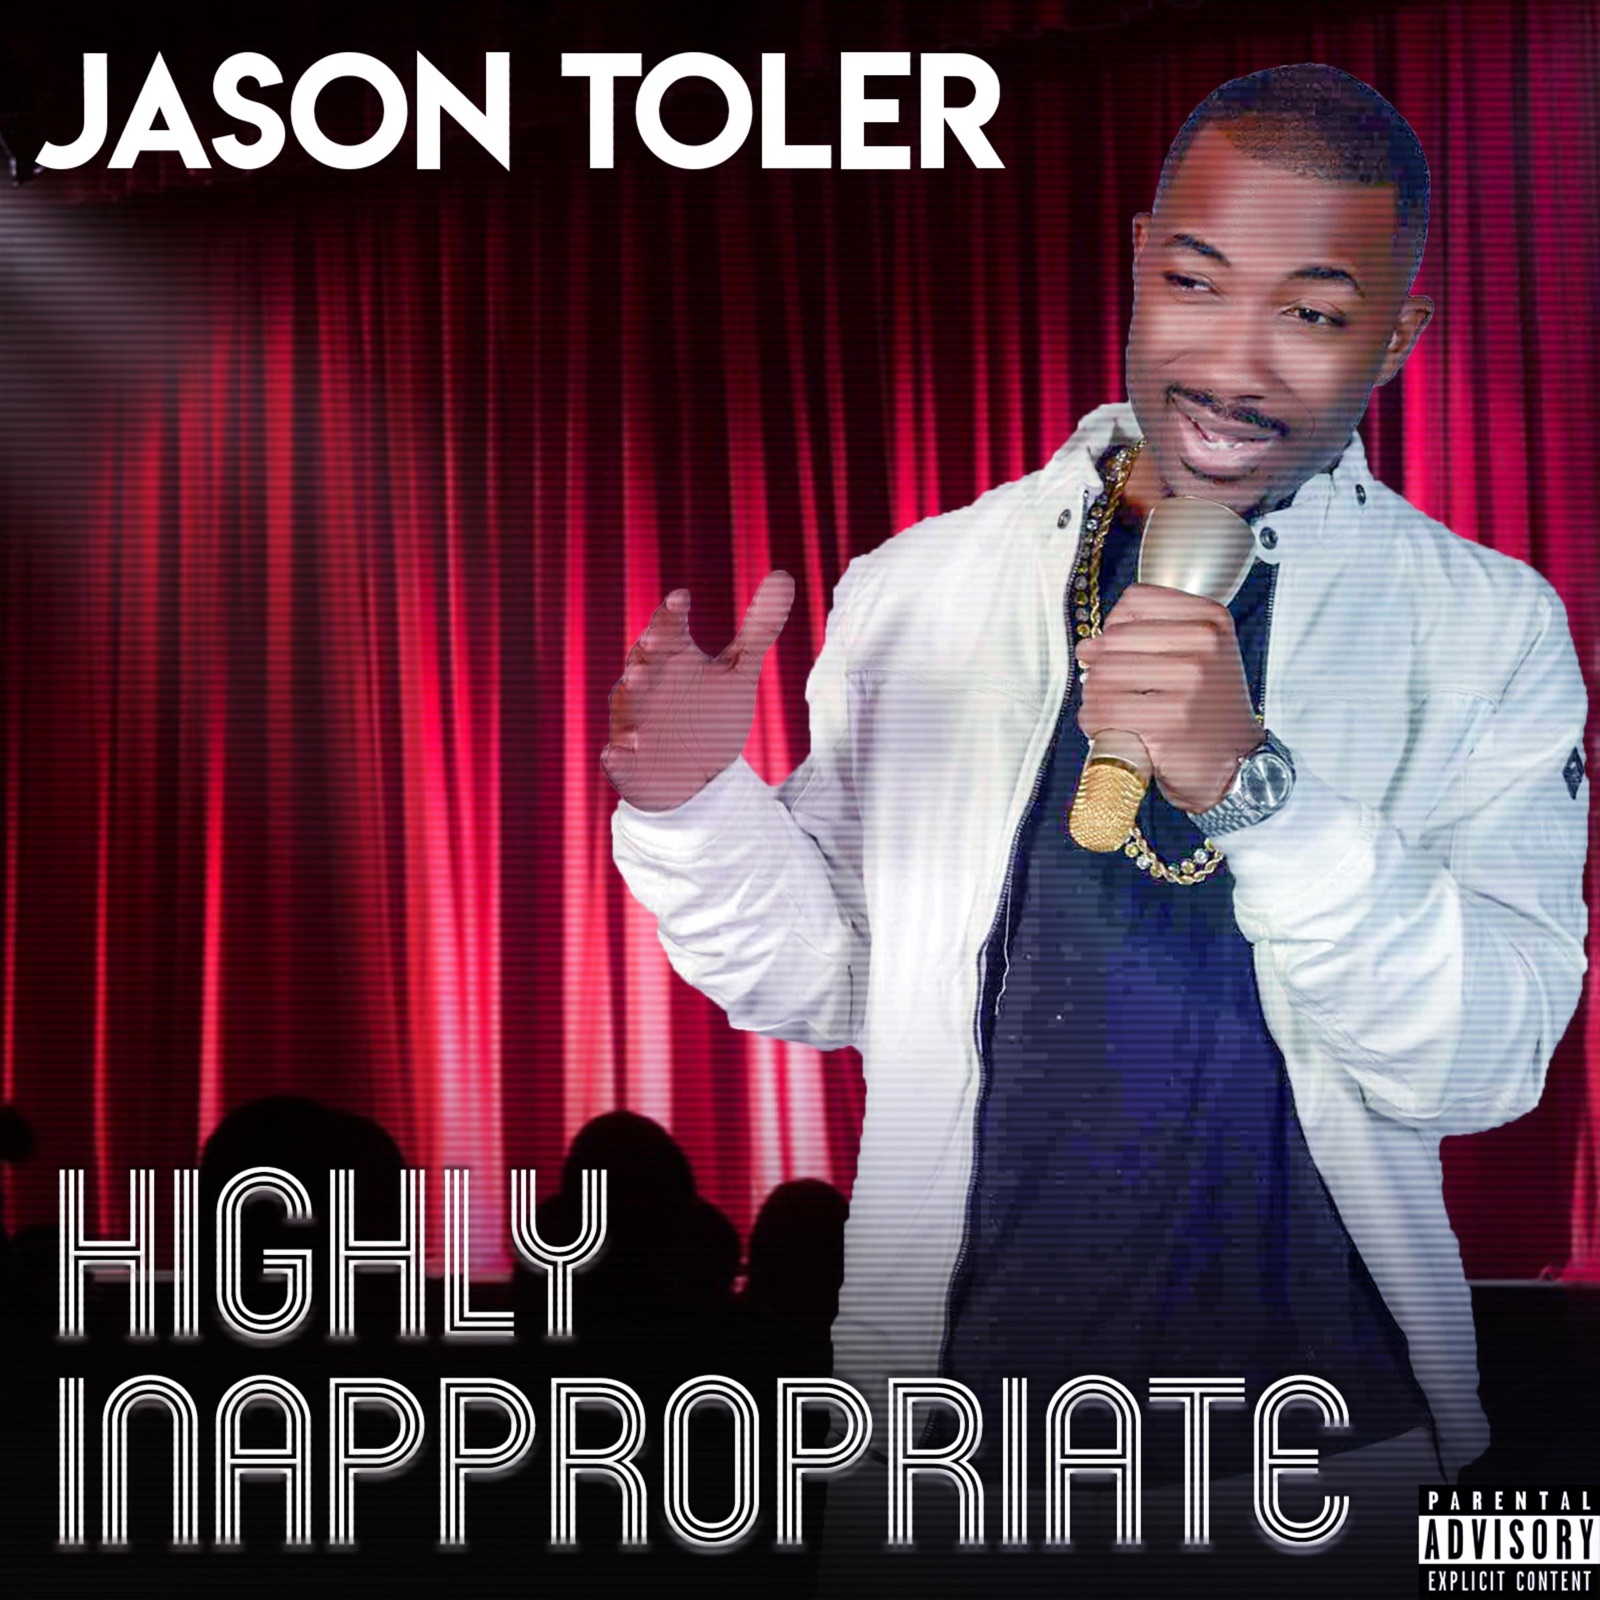 Highly Inappropriate (The Album)